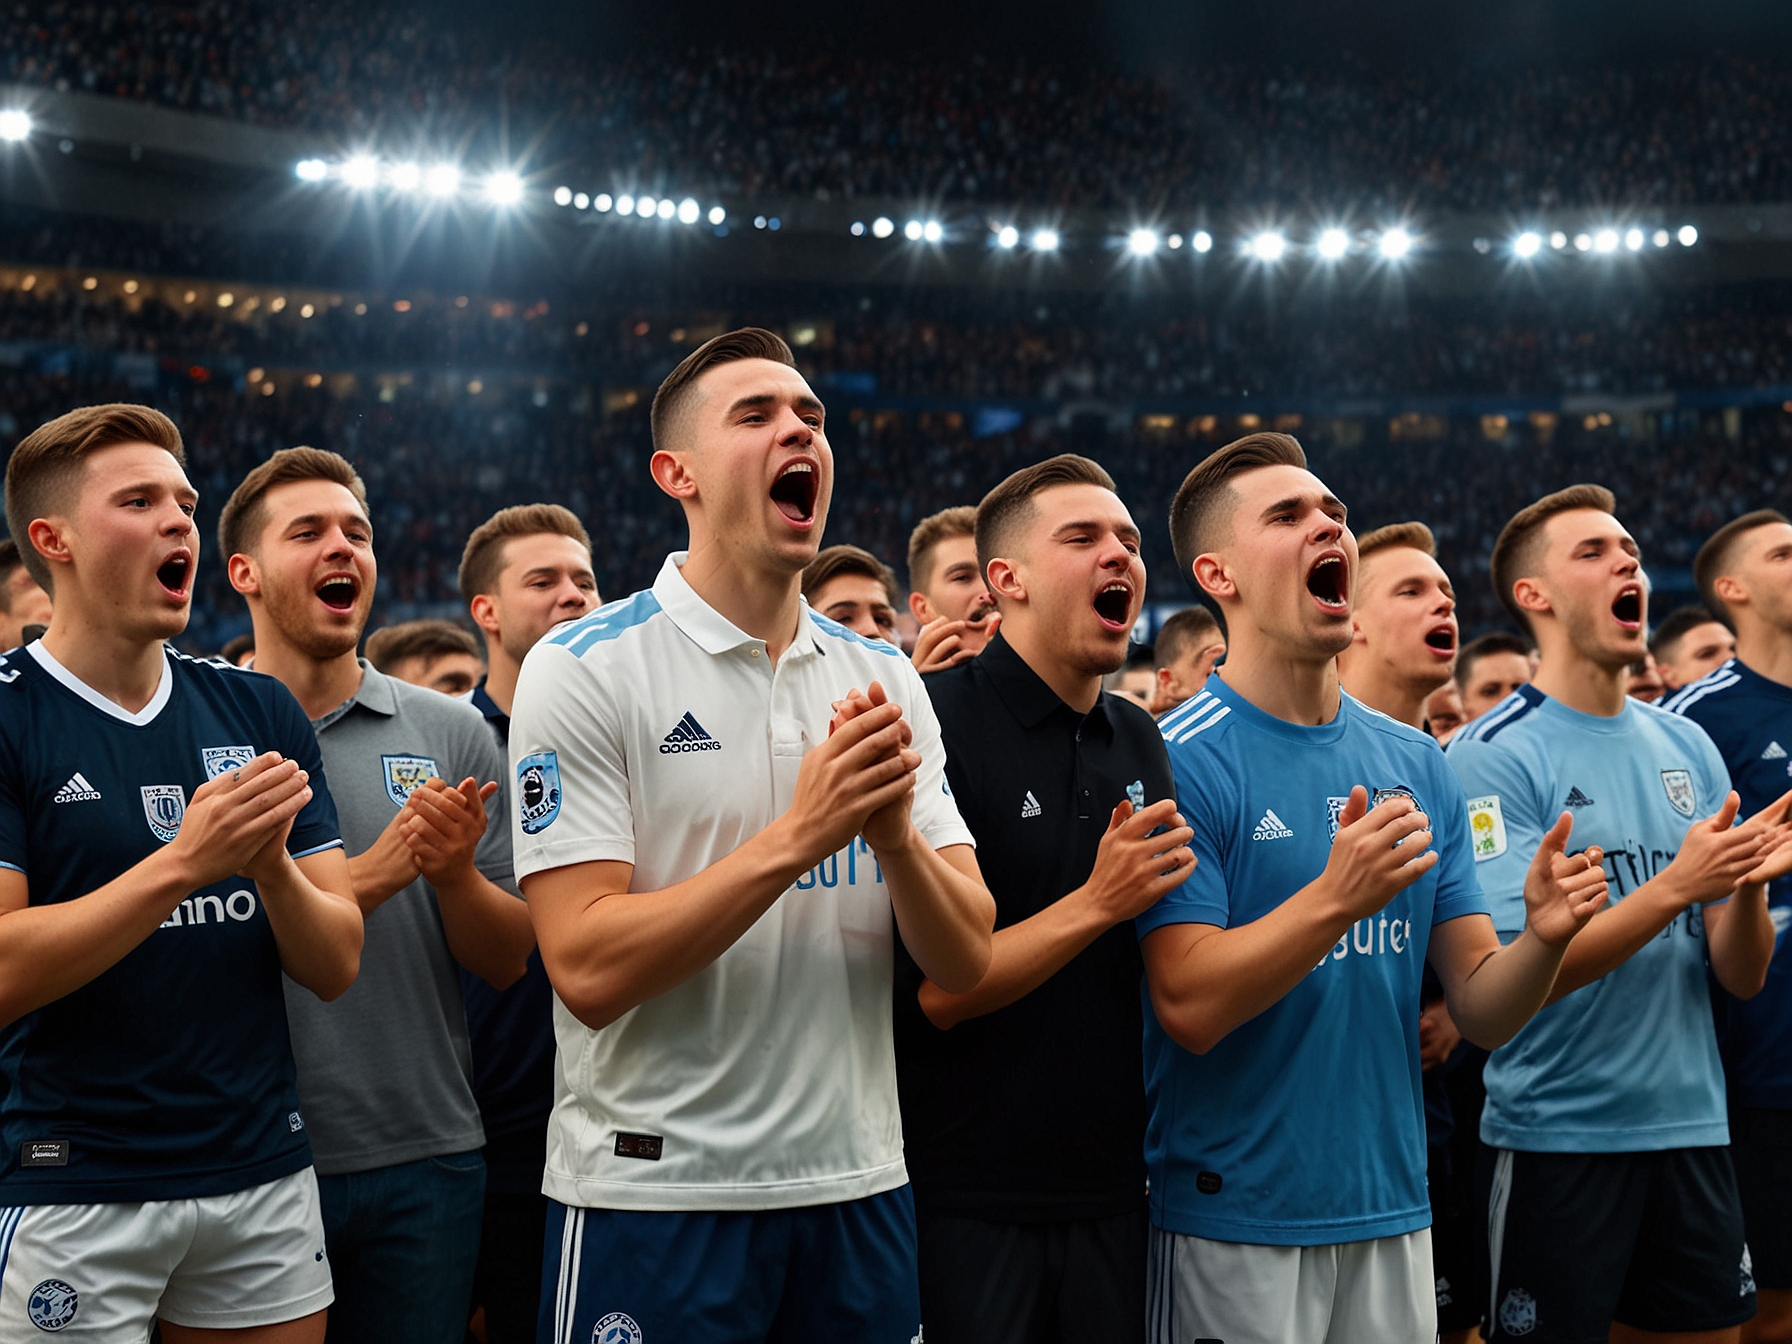 English fans in Gelsenkirchen's Veltins-Arena passionately singing a newly coined anthem for Phil Foden, showcasing the unity and fervor among the supporters.